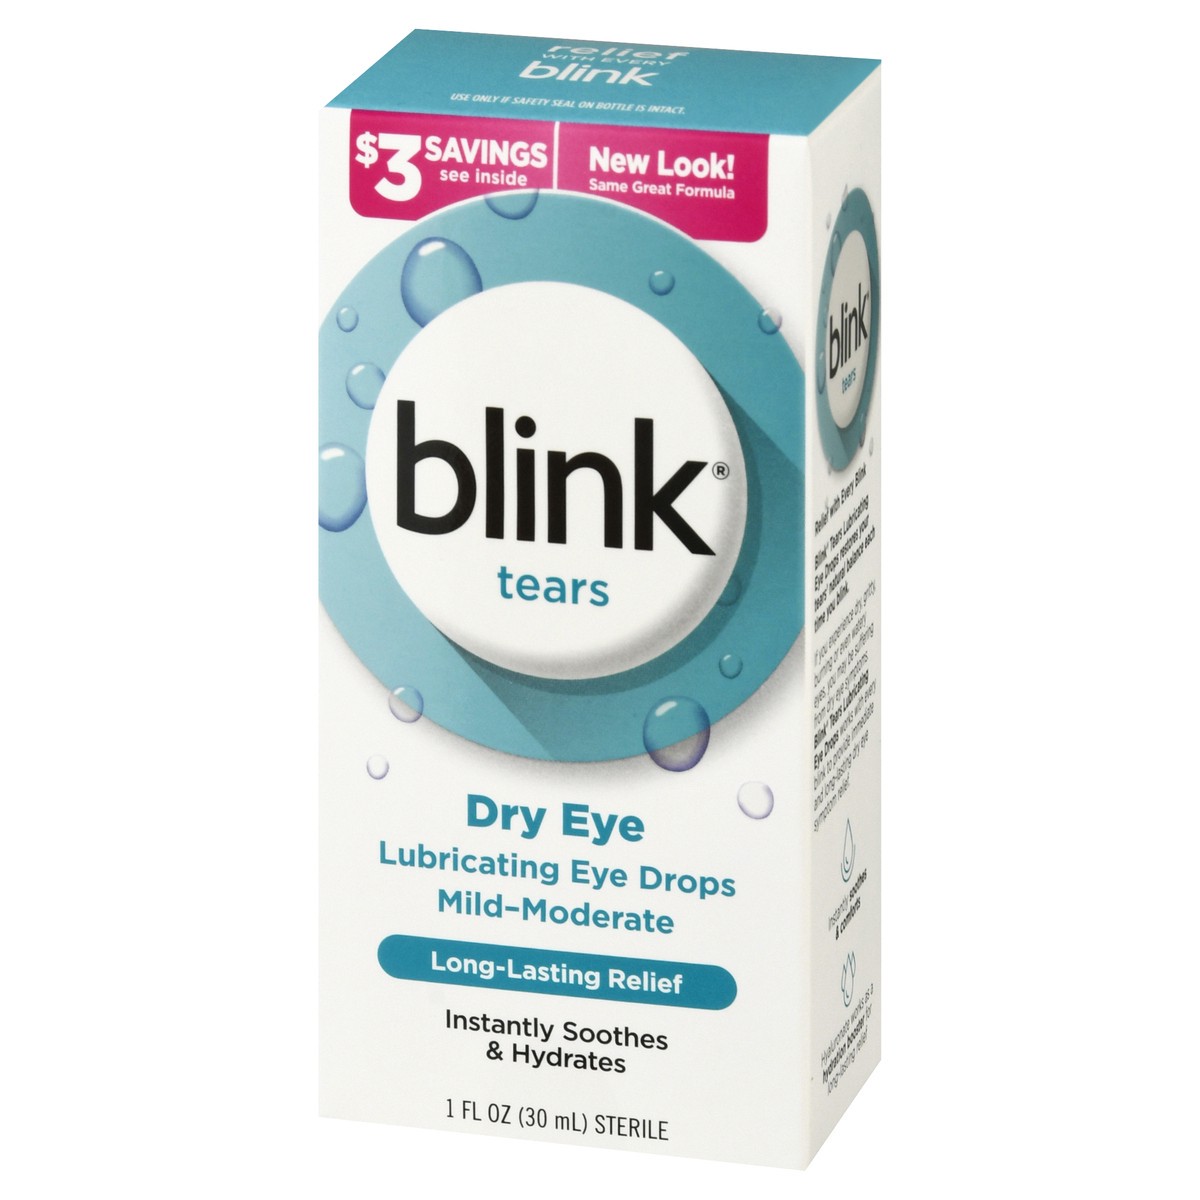 slide 3 of 9, Blink Tears Lubricating Eye Drops, Eye Care for Mild to Moderate Dry Eyes, Hyaluronate for Boosting Hydration, Moisturizing & Soothing Eye Drops for Dry Eyes, 1 fl oz (30 mL)
, 30 ml